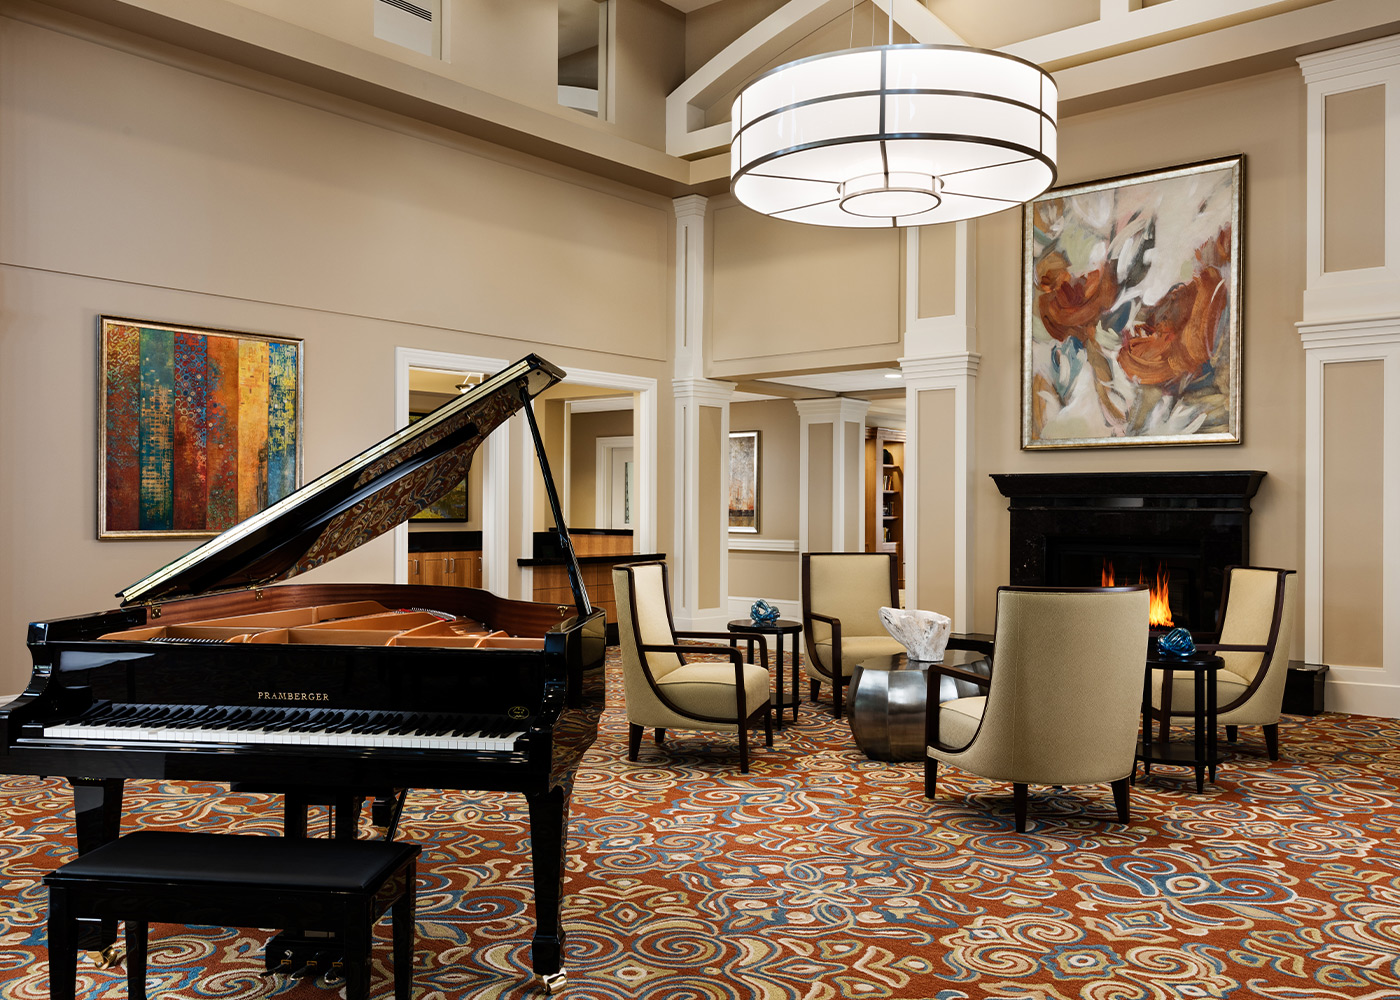 Interior-Sitting Area with Piano and Fireplace-HarborChase of Naperville-Illinois Senior Living